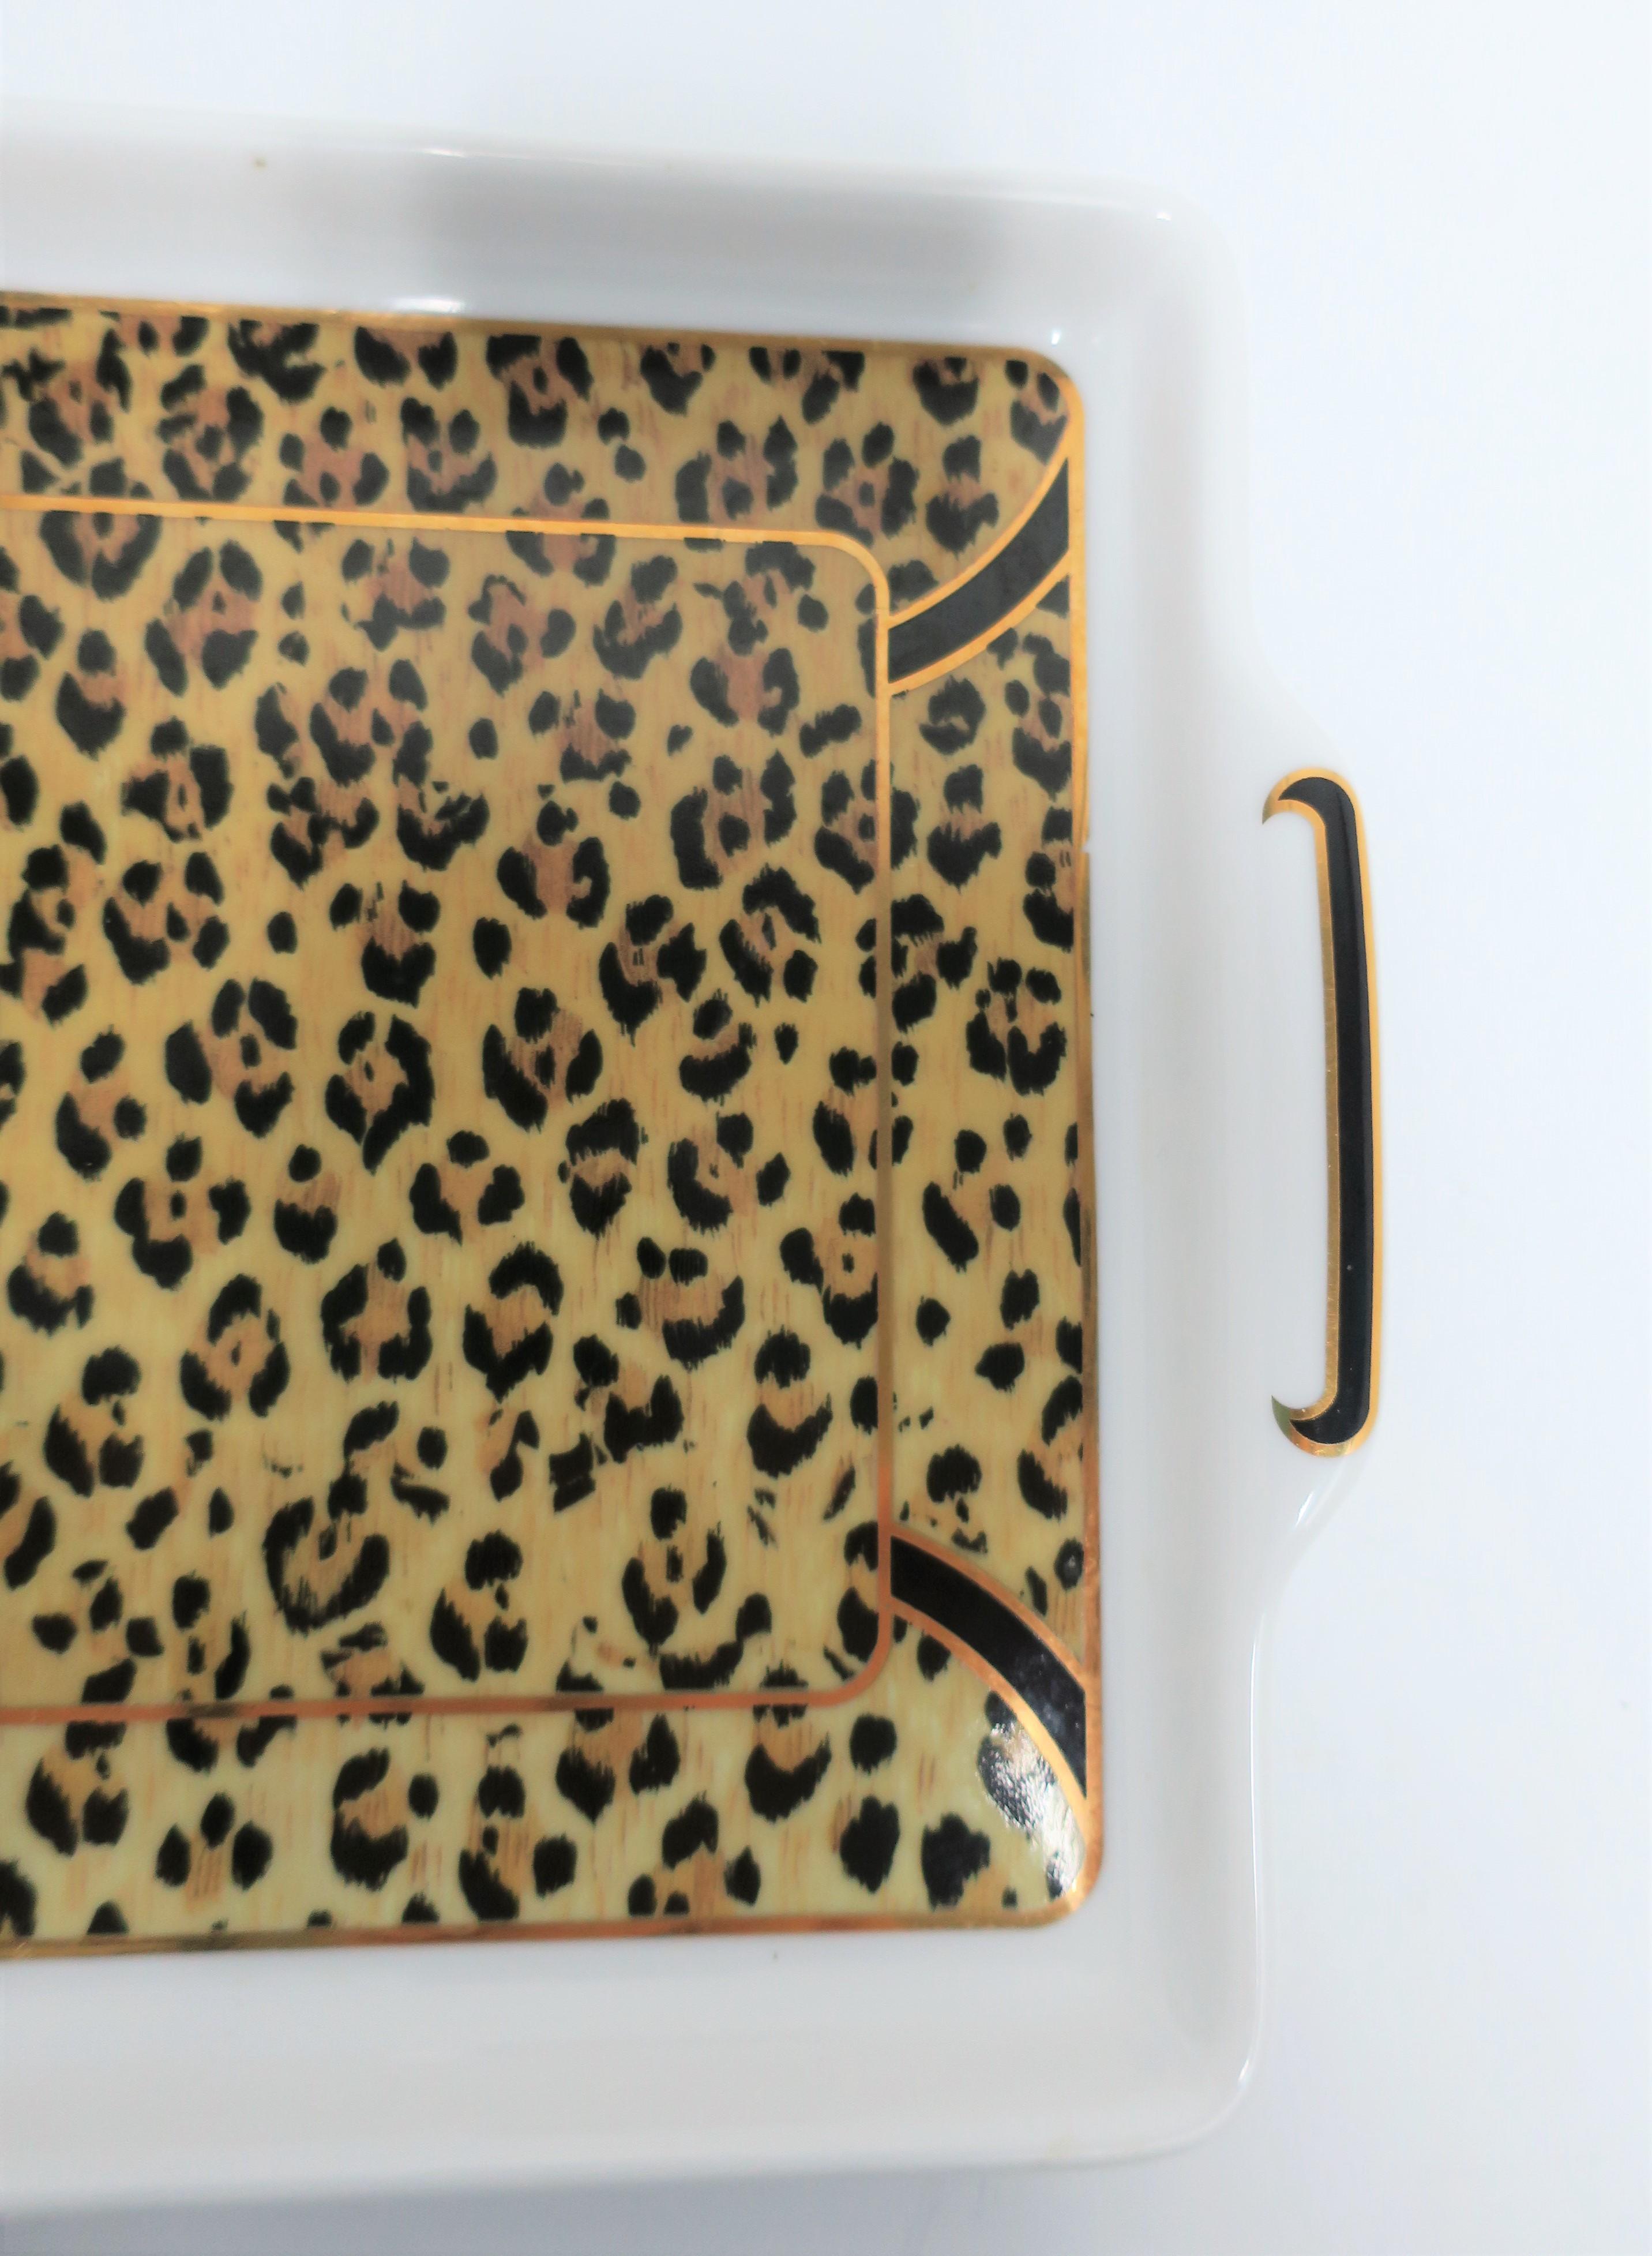 Ceramic Leopard Cat Porcelain Serving Tray in Black and Gold, circa 1990s For Sale